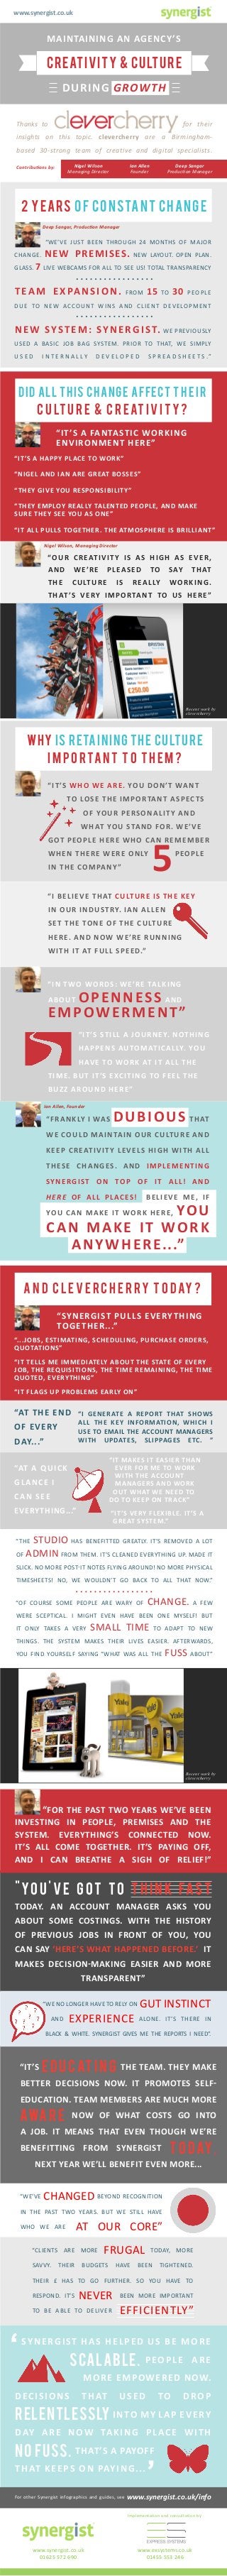 www.synergist.co.uk

MAINTAINING AN AGENCY’S

C R EAT I V I TY & C U LT U R E
DURING GROWTH
Thanks to

for their

insights on this topic. clevercherry are a Birminghambased 30-strong team of creative and digital specialists.
Nigel Wilson
Managing Director

Contributions by:

Ian Allen
Founder

Deep Sangar
Production Manager

2 Y EA RS O F C O N STA N T C H A N G E
Deep Sangar, Production Manager

	

“WE’VE JUST BEEN THROUGH 24 MONTHS OF MAJOR

CHANGE.

NEW PREMISES.

GLASS.

NEW LAYOUT. OPEN PLAN.

7 LIVE WEBCAMS FOR ALL TO SEE US! TOTAL TRANSPARENCY

T E A M E X PA N S I O N .

15

FROM

30

TO

PEOPLE

D U E TO N E W A C C O U N T W I N S A N D C L I E N T D E V E LO P M E N T

N E W S Y S T E M : S Y N E R G I S T. WE PREVIOUSLY
USED A BASIC JOB BAG SYSTEM. PRIOR TO THAT, WE SIMPLY
USED

I N T E R N A L LY

DEVELOPED

S P R E A D S H E E T S .”

D I D A LL TH IS CHA N G E A FFECT T H E I R

C U LT U R E & C R E AT I V I T Y ?
“I T ’S A FA N TA ST I C WO R K I N G
E N V I RO N M E N T H E R E”
“I T ’S A H A P P Y P L AC E TO WO R K”
“N I G E L A N D I A N A R E G R EAT B O S S ES”
“ T H E Y G I V E YO U R ES P O N S I B I L I T Y”
“ T H E Y E M P LOY R EA L LY TA L E N T E D P EO P L E, A N D M A K E
S U R E T H E Y S E E YO U A S O N E”
“I T A L L P U L L S TO G E T H E R. T H E AT M O S P H E R E I S B R I L L I A N T ”
Nigel Wilson, Managing Director

“O U R C R EAT I V I T Y I S A S H I G H A S E V E R,
AND

W E’R E

P L EA S E D

THE

C U LT U R E

IS

TO

SAY

R EA L LY

T H AT

WO R K I N G.

T H AT ’S V E RY I M P O RTA N T TO U S H E R E”

Recent work by
clevercherry

W HY IS R ETA I N I N G TH E CU LTU R E
I M P O R TA N T T O T H E M ?
“I T ’S W H O W E A R E. YO U D O N’ T WA N T
TO LO S E T H E I M P O RTA N T A S P EC T S
O F YO U R P E RS O N A L I T Y A N D
W H AT YO U STA N D F O R. W E’V E

5

G OT P EO P L E H E R E W H O C A N R E M E M B E R
W H E N T H E R E W E R E O N LY
I N T H E C O M PA N Y”

P EO P L E

“I B E L I E V E T H AT C U LT U R E I S T H E K E Y
I N O U R I N D U ST RY. I A N A L L E N
S E T T H E TO N E O F T H E C U LT U R E
H E R E. A N D N OW W E’R E R U N N I N G
W I T H I T AT F U L L S P E E D.”

“I N T WO WO R D S: W E’R E TA L K I N G

O P E N N ES S A N D
E M P OW E R M E N T ”

ABOUT

“I T ’S ST I L L A J O U R N E Y. N OT H I N G
H A P P E N S AU TO M AT I C A L LY. YO U
H AV E TO WO R K AT I T A L L T H E
T I M E. B U T I T ’S E XC I T I N G TO F E E L T H E
B U Z Z A RO U N D H E R E”
Ian Allen, Founder

D U B I O U S T H AT

“F R A N K LY I WA S

W E C O U L D M A I N TA I N O U R C U LT U R E A N D
K E E P C R EAT I V I T Y L E V E L S H I G H W I T H A L L
T H ES E C H A N G ES. A N D I M P L E M E N T I N G
SY N E R G I ST O N TO P O F I T A L L! A N D
H E R E O F A L L P L AC ES!

B E L I E V E M E, I F

YO U
C A N M A K E I T WO R K
A N Y W H E R E...”

YO U C A N M A K E I T WO R K H E R E,

A N D C L E V E R C H E R RY T O D AY ?
“SY N E R G I ST P U L L S E V E RY T H I N G
TO G E T H E R...”
“... J O B S, EST I M AT I N G, S C H E D U L I N G, P U R C H A S E O R D E RS,
Q U OTAT I O N S”
“I T T E L L S M E I M M E D I AT E LY A B O U T T H E STAT E O F E V E RY
J O B, T H E R EQ U I S I T I O N S, T H E T I M E R E M A I N I N G, T H E T I M E
Q U OT E D, E V E RY T H I N G”
“I T F L AG S U P P RO B L E M S EA R LY O N”

“AT T H E E N D

“I G E N E R AT E A R E P O RT T H AT S H OW S
A L L T H E K E Y I N F O R M AT I O N, W H I C H I
USE TO EMAIL THE ACCOUNT MANAGERS
W I T H U P DAT ES, S L I P PAG ES E TC. ”

O F E V E RY
DAY...”

“I T M A K ES I T EA S I E R T H A N
E V E R F O R M E TO WO R K
W I T H T H E AC C O U N T
M A N AG E RS A N D WO R K
O U T W H AT W E N E E D TO
D O TO K E E P O N T R AC K”

“AT A Q U I C K
GLANCE I
CAN SEE
EVERYTHING...”

“I T ’S V E RY F L E X I B L E. I T ’S A
G R EAT SYST E M.”

STUDIO HAS BENEFITTED GREATLY. IT’S REMOVED A LOT
OF ADMIN FROM THEM. IT’S CLEANED EVERYTHING UP. MADE IT

“THE

SLICK. NO MORE POST-IT NOTES FLYING AROUND! NO MORE PHYSICAL
TIMESHEETS! NO, WE WOULDN’T GO BACK TO ALL THAT NOW.”

CHANGE.

“OF COURSE SOME PEOPLE ARE WARY OF

A FEW

WERE SCEPTICAL. I MIGHT EVEN HAVE BEEN ONE MYSELF! BUT
IT ONLY TAKES A VERY

SMALL TIME

TO ADAPT TO NEW

THINGS. THE SYSTEM MAKES THEIR LIVES EASIER. AFTERWARDS,
YOU FIND YOURSELF SAYING “WHAT WAS ALL THE

FUSS ABOUT”

Recent work by
clevercherry

“FOR THE PAST TWO YEARS WE’VE BEEN
INVESTING IN PEOPLE, PREMISES AND THE
SYSTEM. EVERYTHING’S CONNECTED NOW.
IT’S ALL COME TOGETHER. IT’S PAYING OFF,
AND I CAN BREATHE A SIGH OF RELIEF!”

"YO U ' v e g o t t o T H I N K FA S T
TODAY. AN ACCOUNT MANAGER ASKS YOU
ABOUT SOME COSTINGS. WITH THE HISTORY
OF PREVIOUS JOBS IN FRONT OF YOU, YOU
CAN SAY ‘HERE’S WHAT HAPPENED BEFORE.’ IT
MAKES DECISION-MAKING EASIER AND MORE
TRANSPARENT”
“WE NO LONGER HAVE TO RELY ON
AND

EXPERIENCE

GUT INSTINCT
ALONE. IT’S THERE IN

BLACK & WHITE. SYNERGIST GIVES ME THE REPORTS I NEED”.

“IT’S

E D U C AT I N G

THE TEAM. THEY MAKE

BETTER DECISIONS NOW. IT PROMOTES SELFEDUCATION. TEAM MEMBERS ARE MUCH MORE

AWA R E

NOW OF WHAT COSTS GO INTO

A JOB. IT MEANS THAT EVEN THOUGH WE’RE
BENEFITTING FROM SYNERGIST

T O D AY ,

NEXT YEAR WE’LL BENEFIT EVEN MORE...
“WE’VE

CHANGED BEYOND RECOGNITION

IN THE PAST TWO YEARS. BUT WE STILL HAVE

AT OUR CORE”

WHO WE ARE

“CLIENTS ARE MORE
SAVVY.

THEIR

FRUGAL

BUDGETS

HAVE

TODAY, MORE

BEEN

TIGHTENED.

THEIR £ HAS TO GO FURTHER. SO YOU HAVE TO

NEVER

BEEN MORE IMPORTANT

TO BE ABLE TO DELIVER

EFFICIENTLY”

RESPOND. IT’S

‘

SY N E R G I ST H A S H E L P E D U S B E M O R E

SCALABLE.

P EO P L E A R E

MORE EMPOWERED NOW.
D EC I S I O N S

T H AT

USED

TO

D RO P

RELENTLESSLY I N TO M Y L A P E V E RY
DAY A R E N OW TA K I N G P L AC E W I T H

NO FUSS. THAT’S A PAYOFF
T H AT K E E P S O N PAY I N G...
For other Synergist infographics and guides, see

’

www.synergist.co.uk/info
Implementation and consultation by

www.synergist.co.uk
01625 572 690

www.exsystems.co.uk
01455 553 246

 